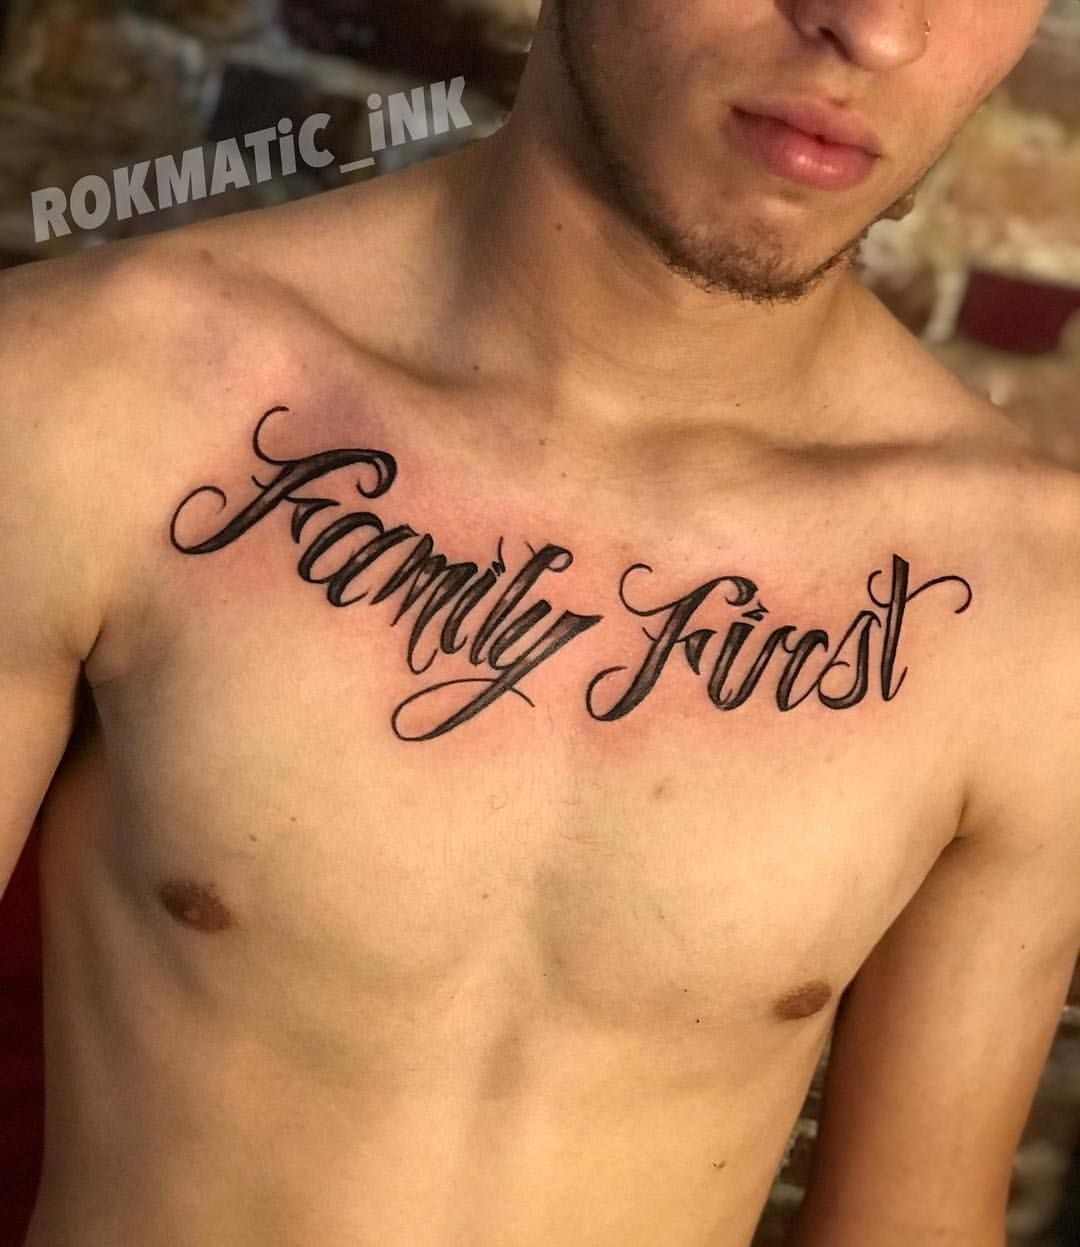 Family First Always Rokmatic Ink Tattoo Thetattplug intended for size 1080 X 1247